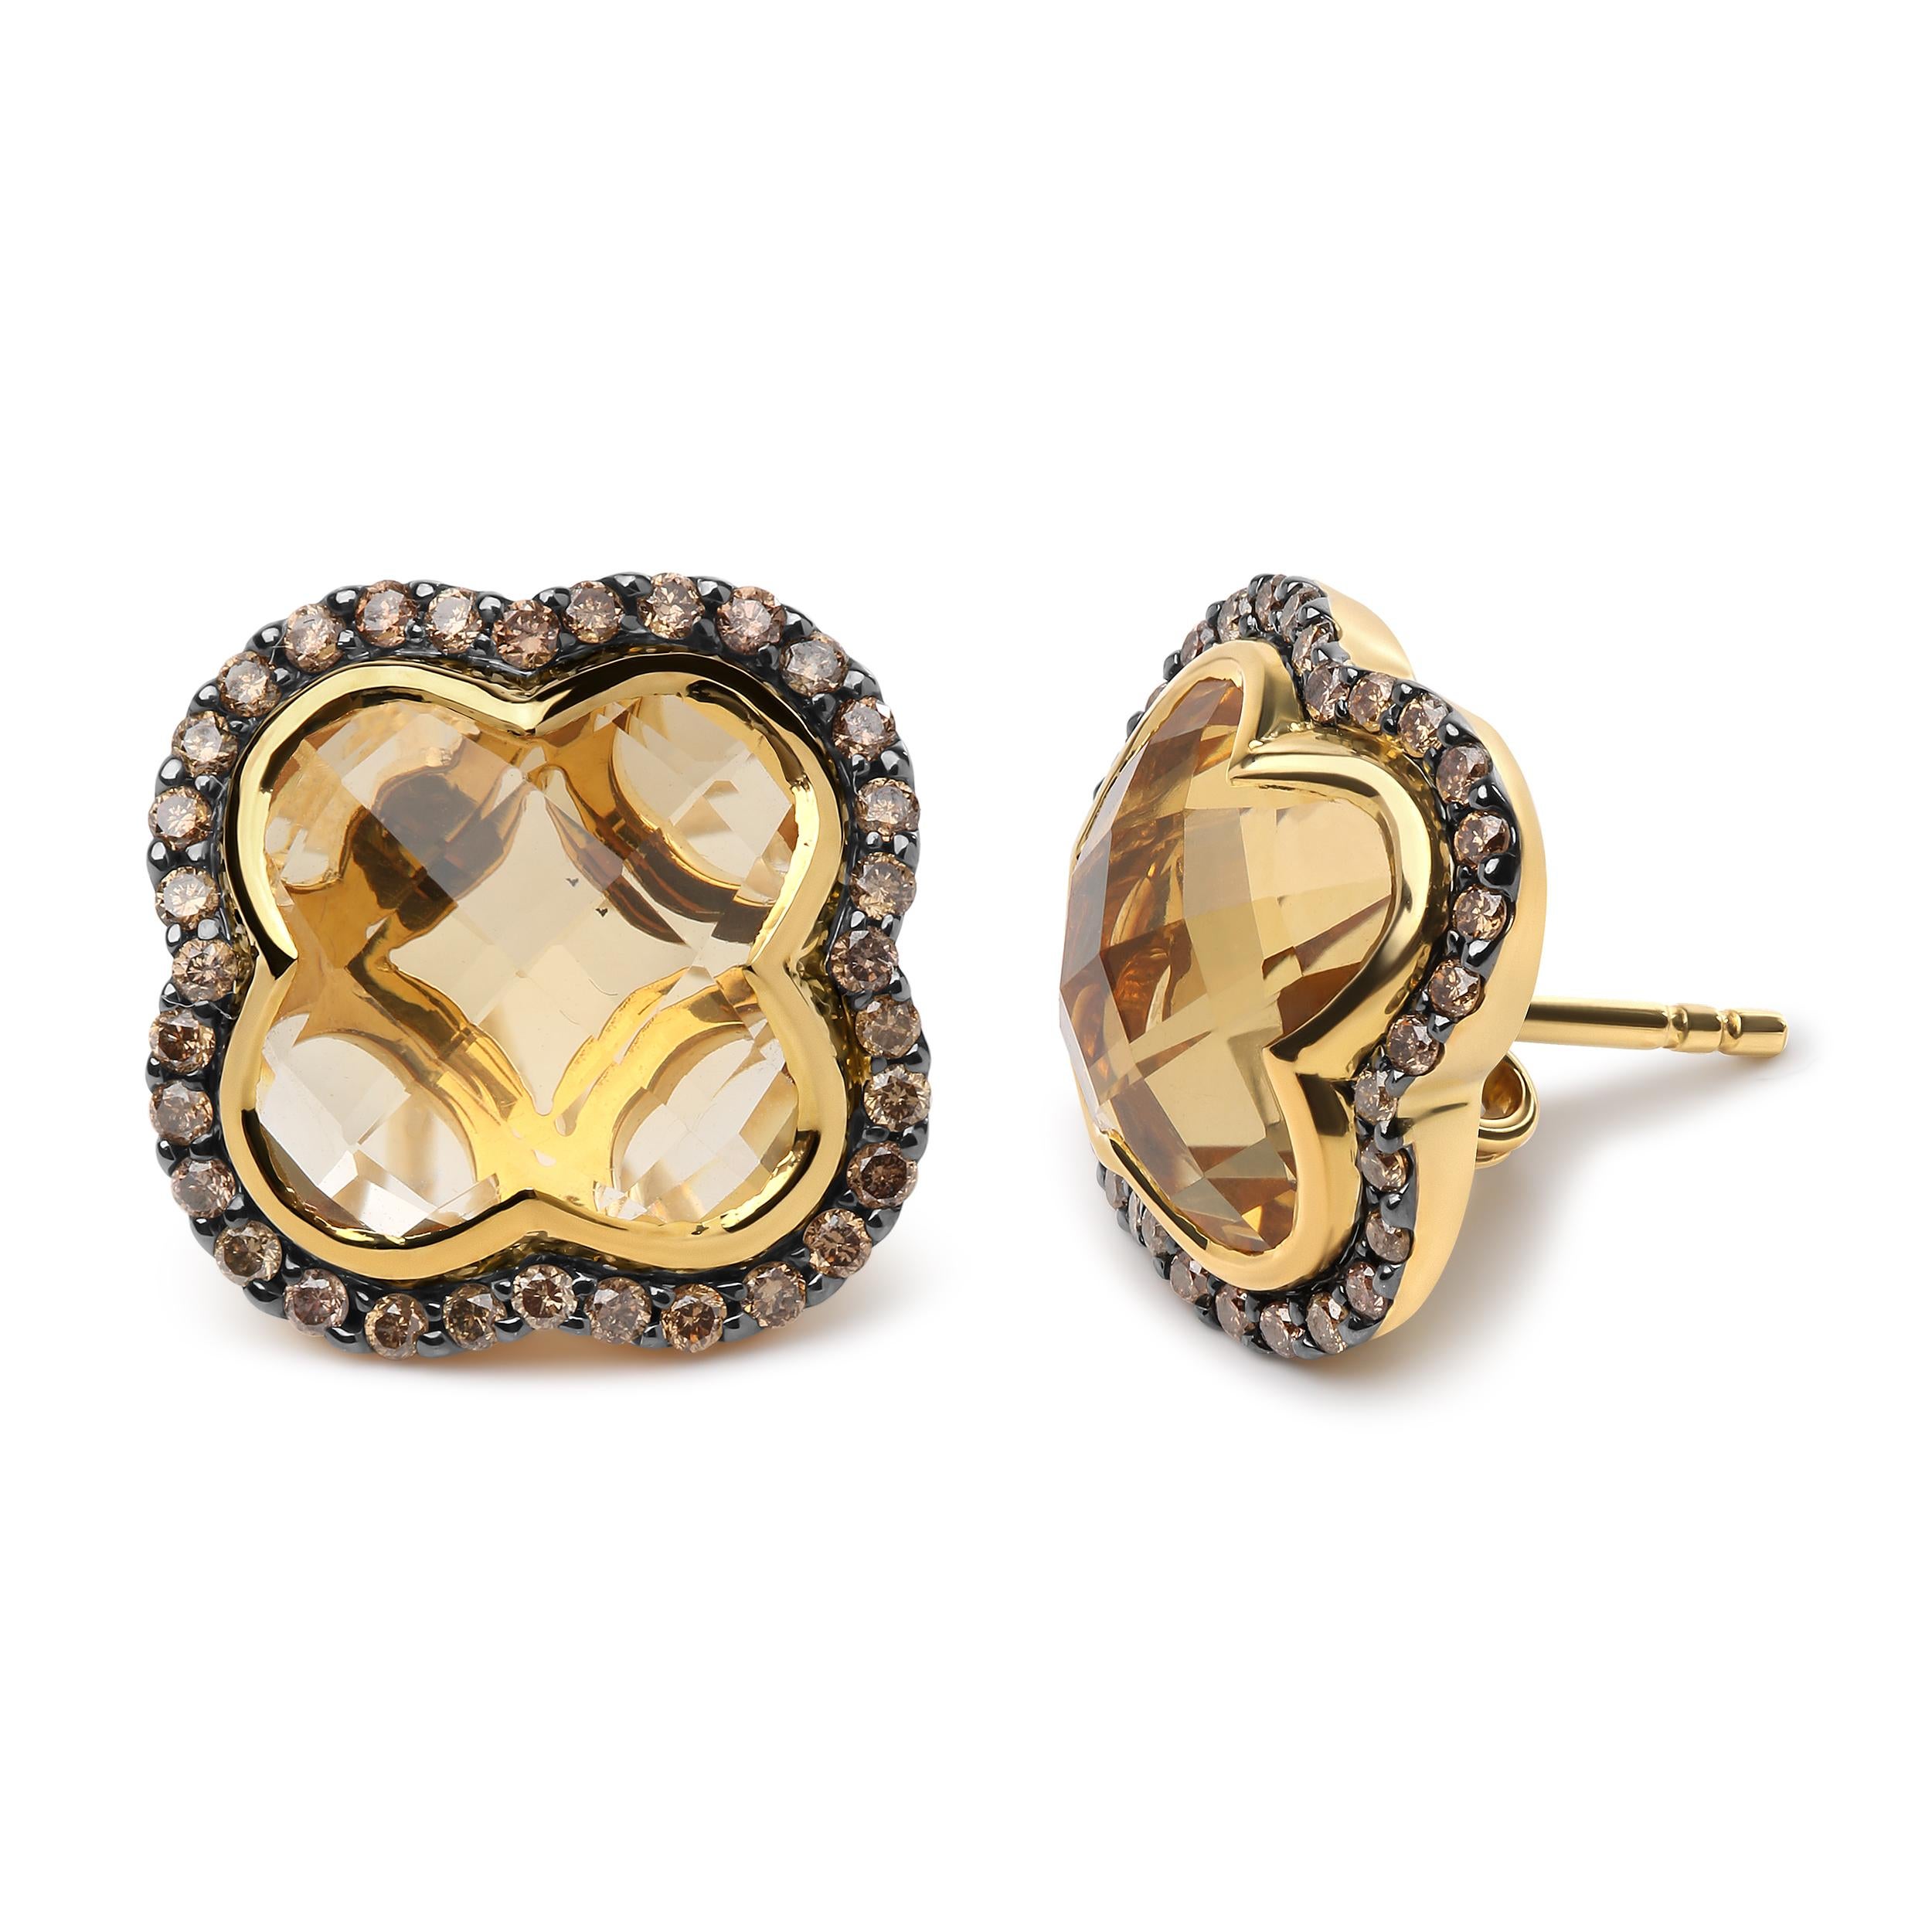 These whimsical yet sophisticated 18k yellow gold earrings will bring you good fortune with their lovely shimmer and dazzling elegance. A natural 11x11mm clover-cut yellow citrine gemstone sits prominently in an invisible setting that perfectly